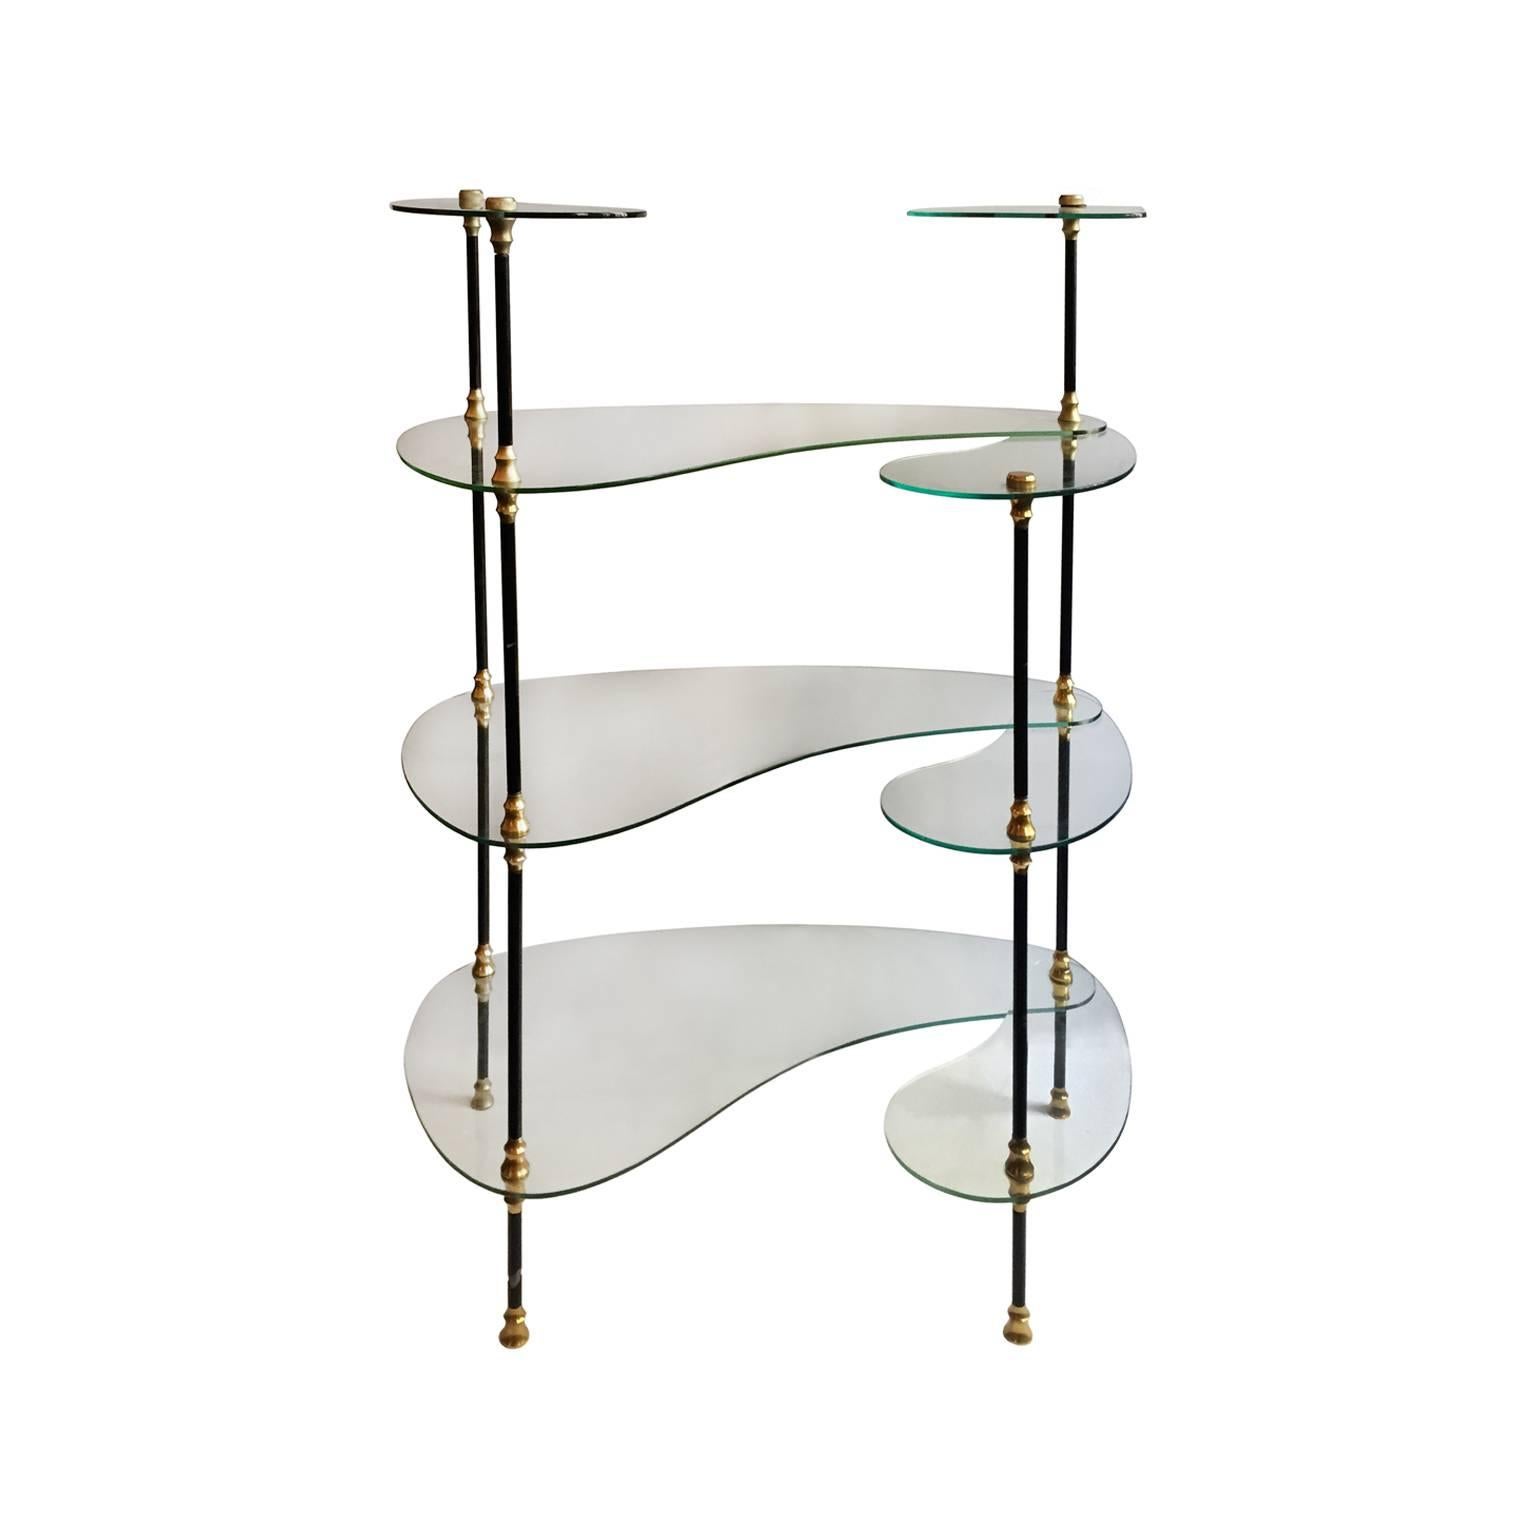 Midcentury French Free-Form Glass Etagere